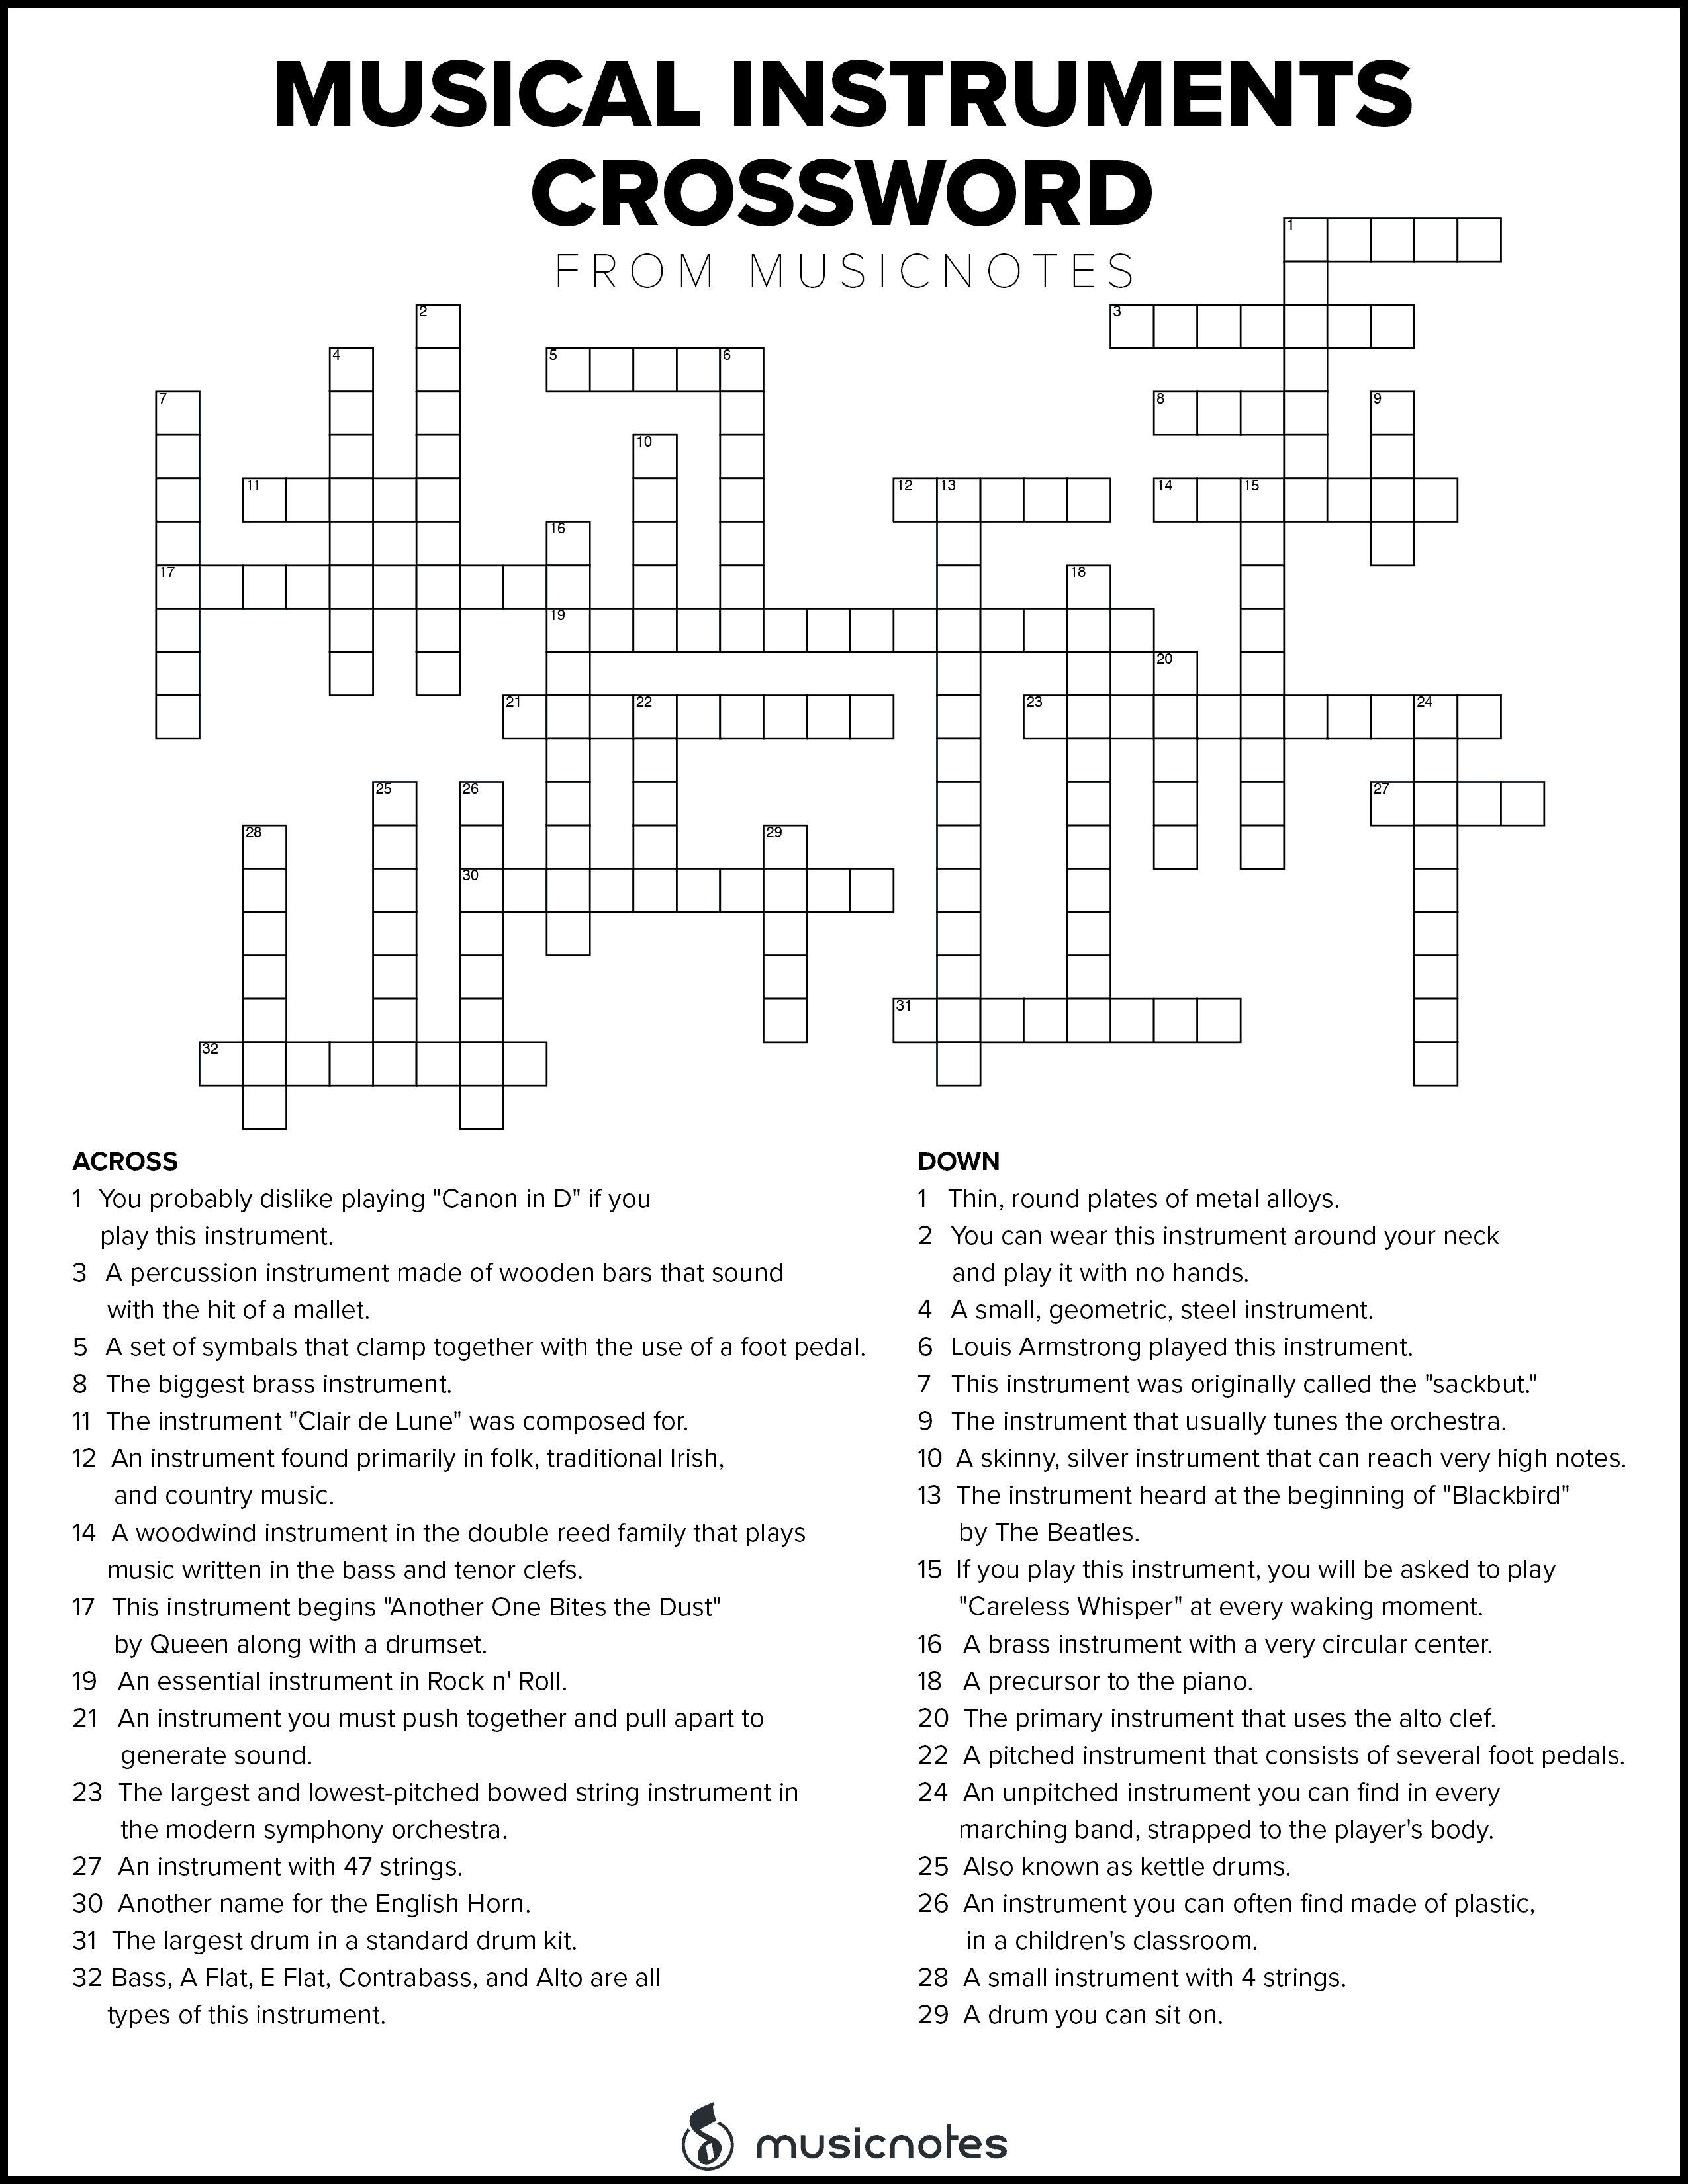 Pin On Logic And Reasoning - Musical With The Song Easy To Be Hard Crossword